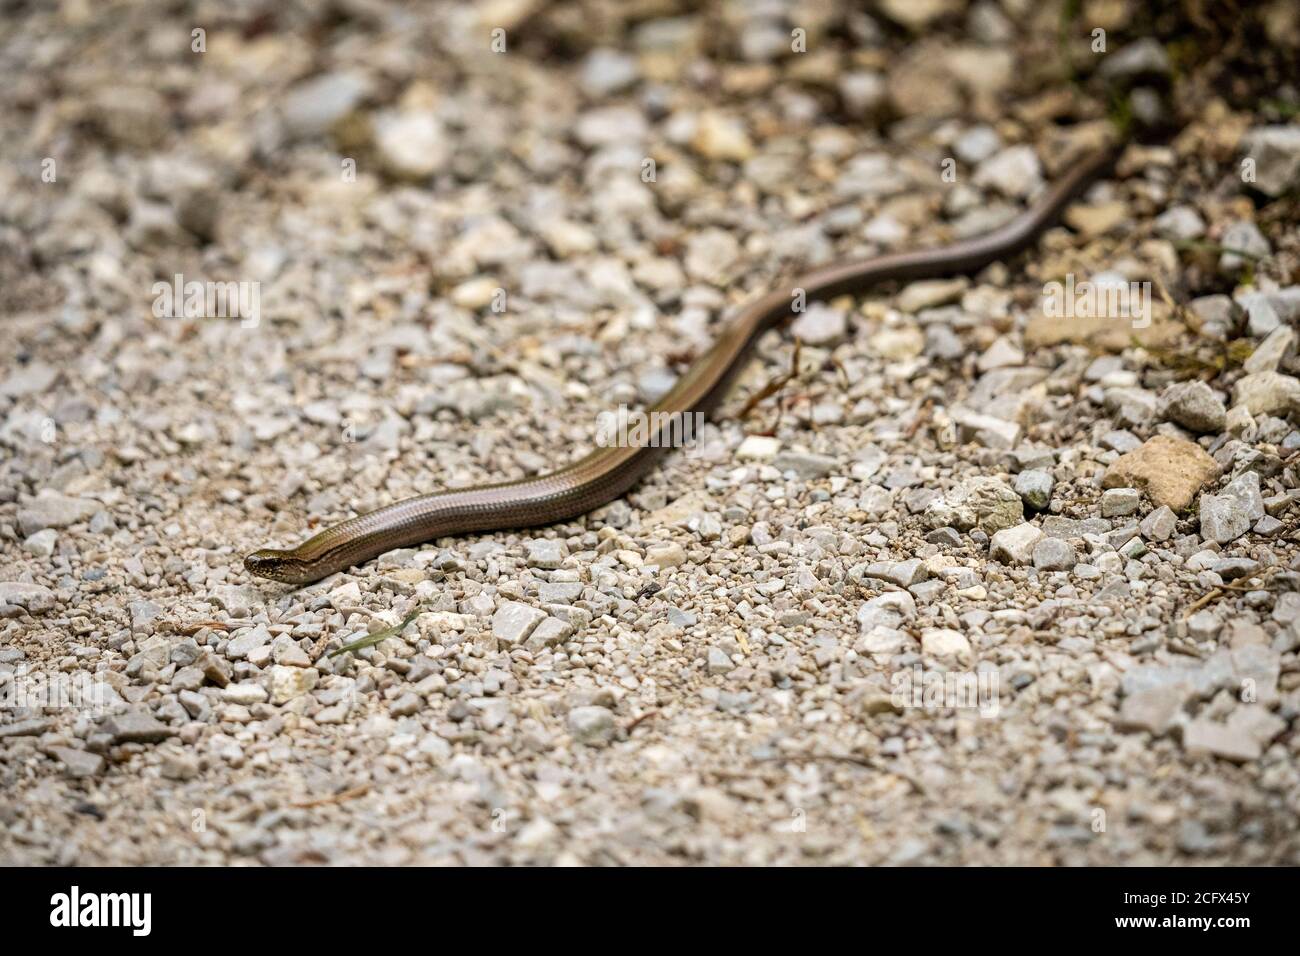 closeup of a blindworm on a gravel road in bavaria, germany Stock Photo